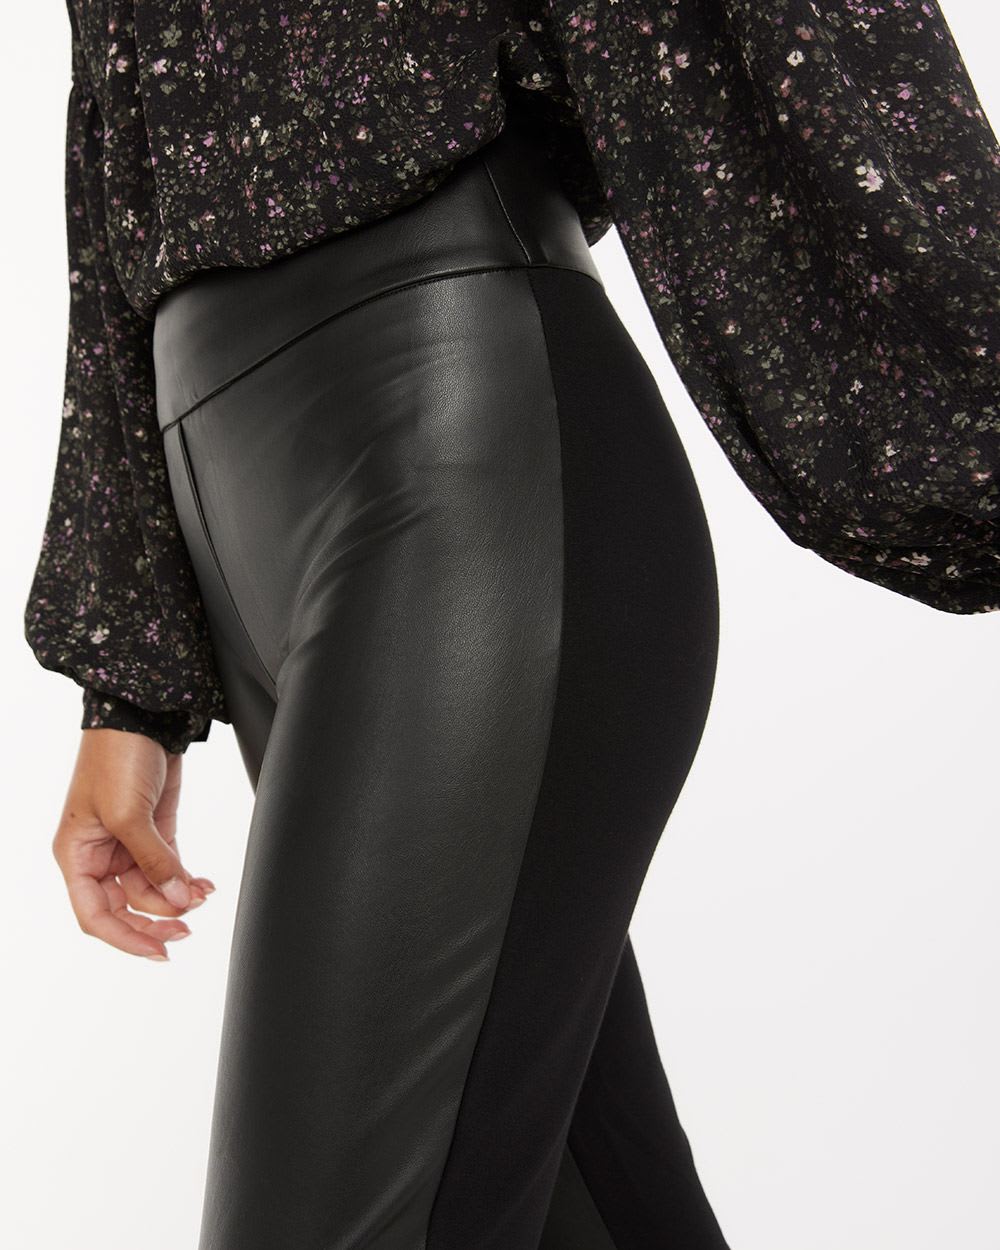 High-Rise Leggings with Vegan Leather Front, The 365 Edition - Tall, Tall